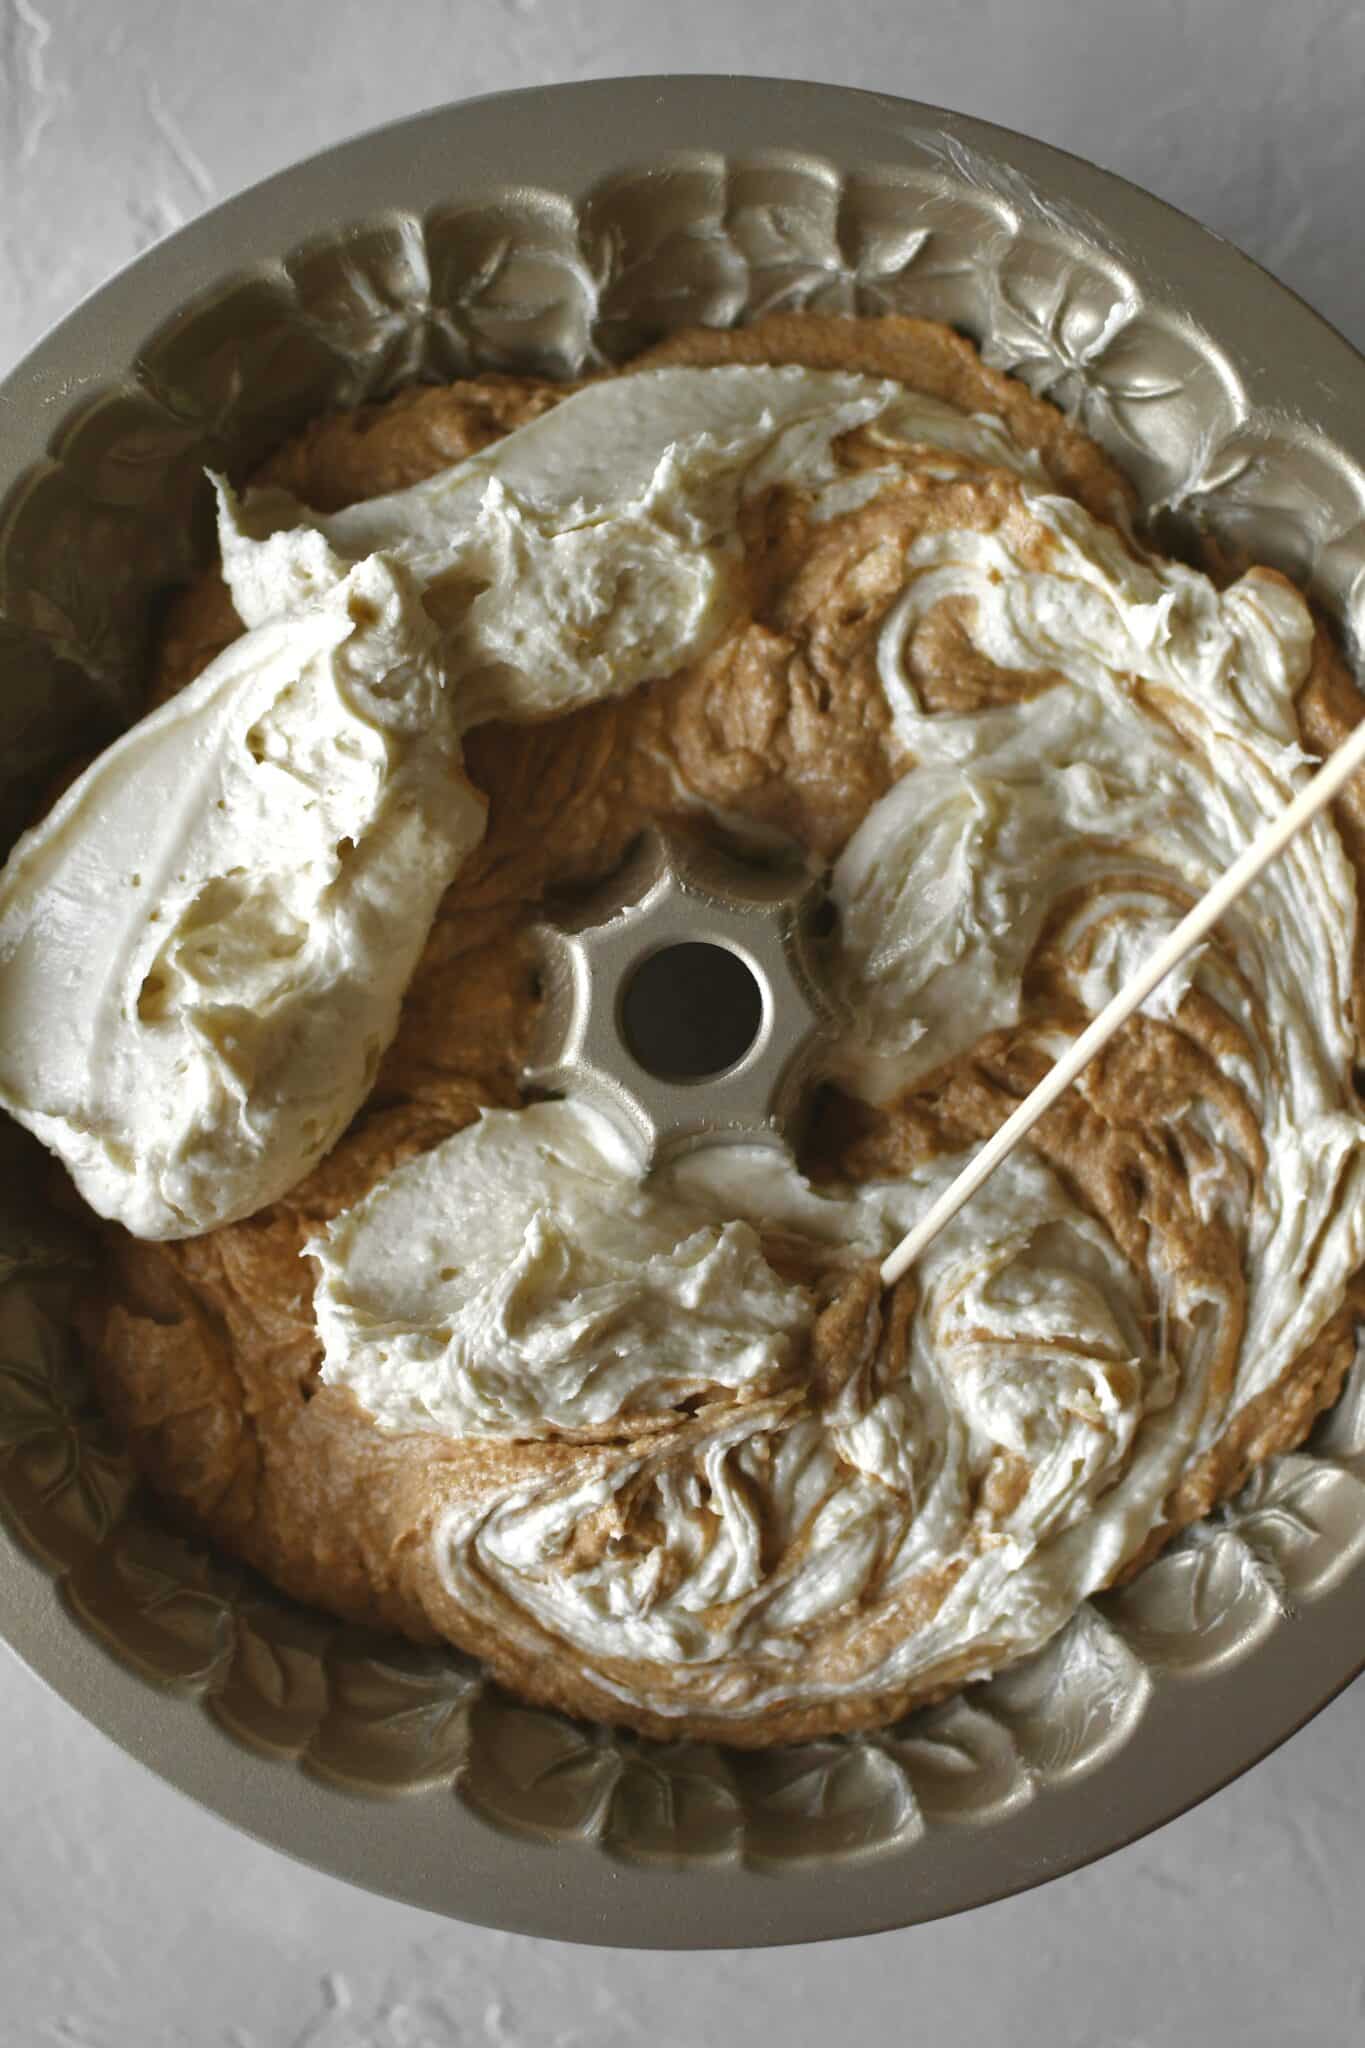 Swirling the first layer of plain and pumpkin cake together in the pan.